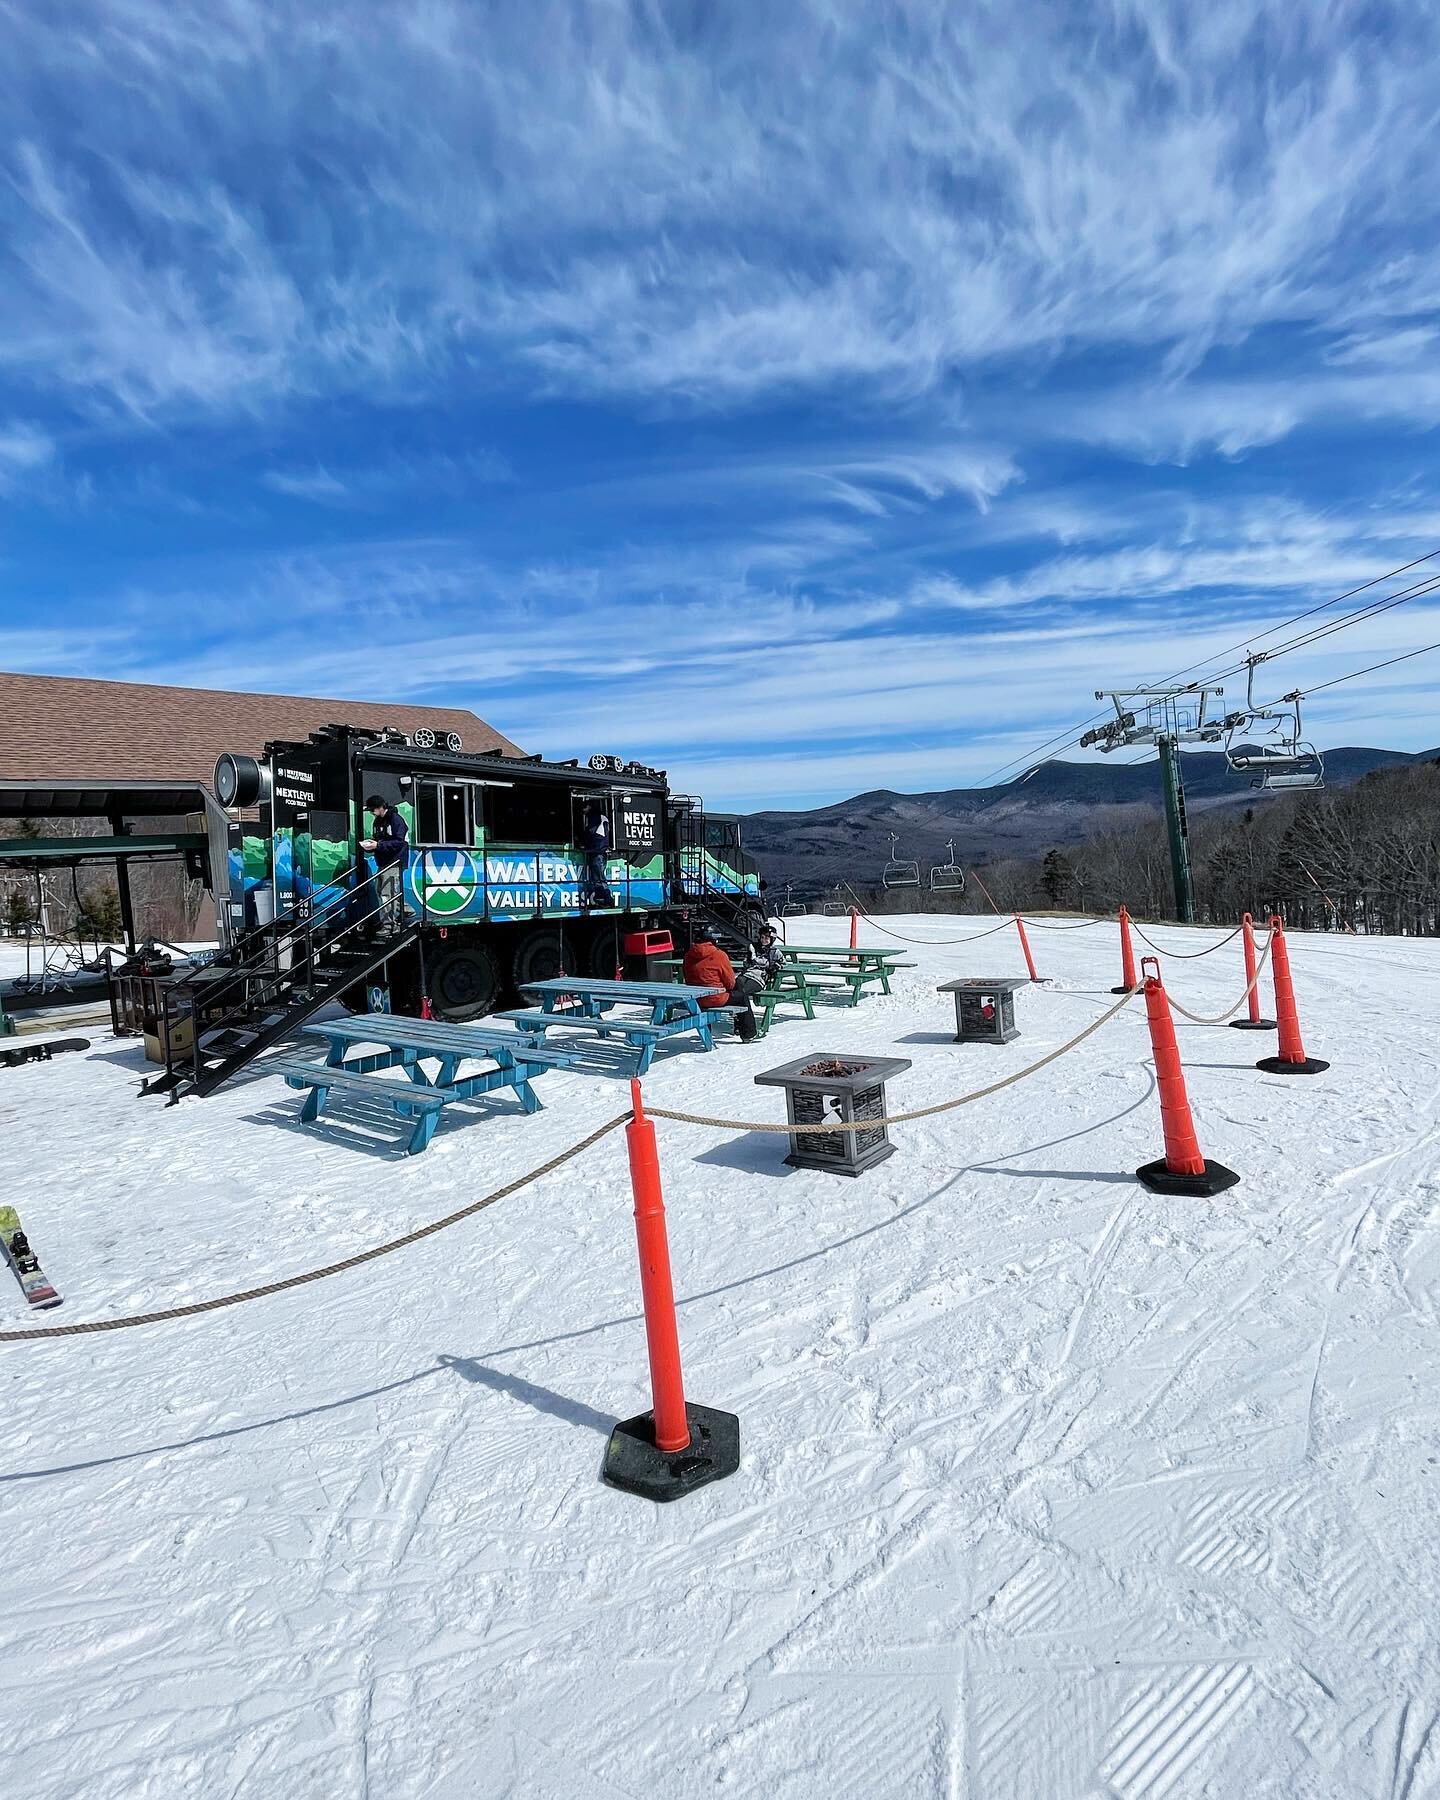 Hot Food, Fire Places, &amp; Sunshine. Stop in and see us on your run down form the Summit or Green Peak today! ☀️

#wvnextlevel #watervillevalleyresort